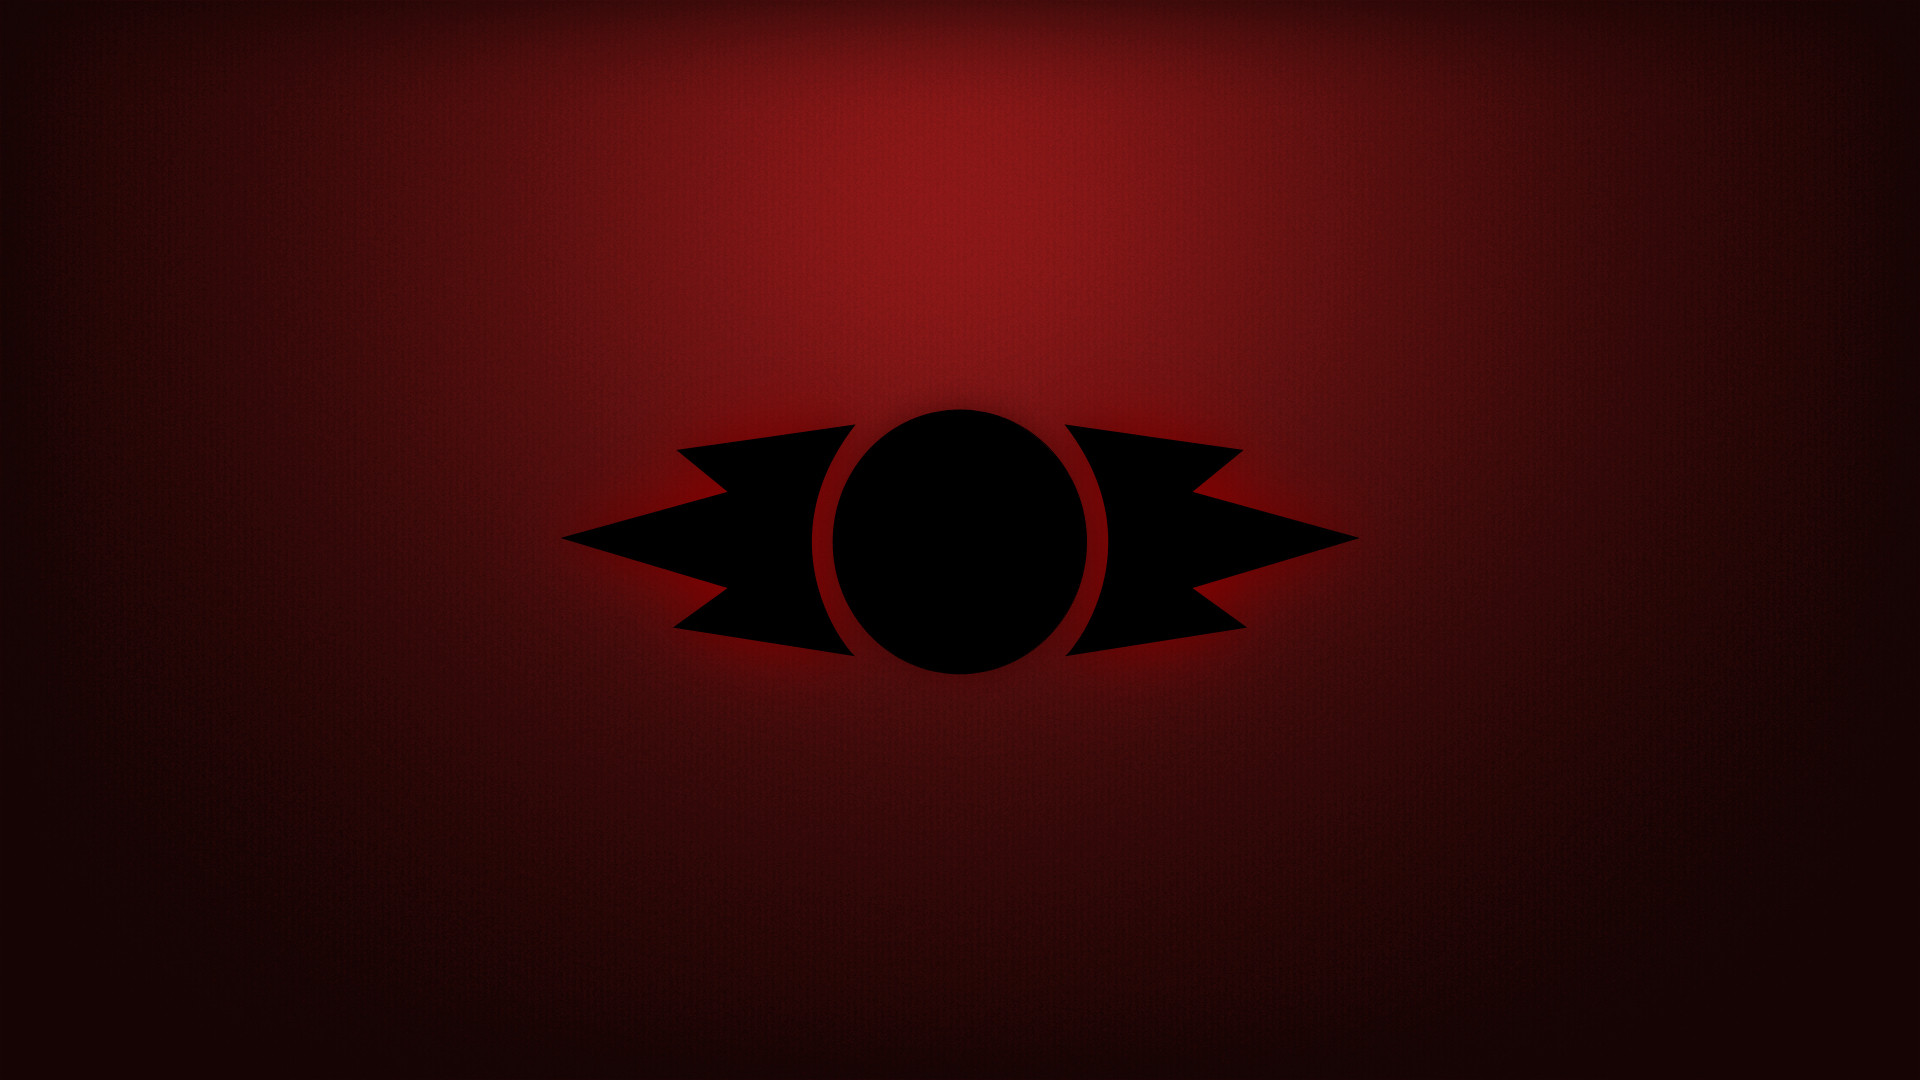 wallpaper you guys might like The Jedi Order emblem Ill do a Sith